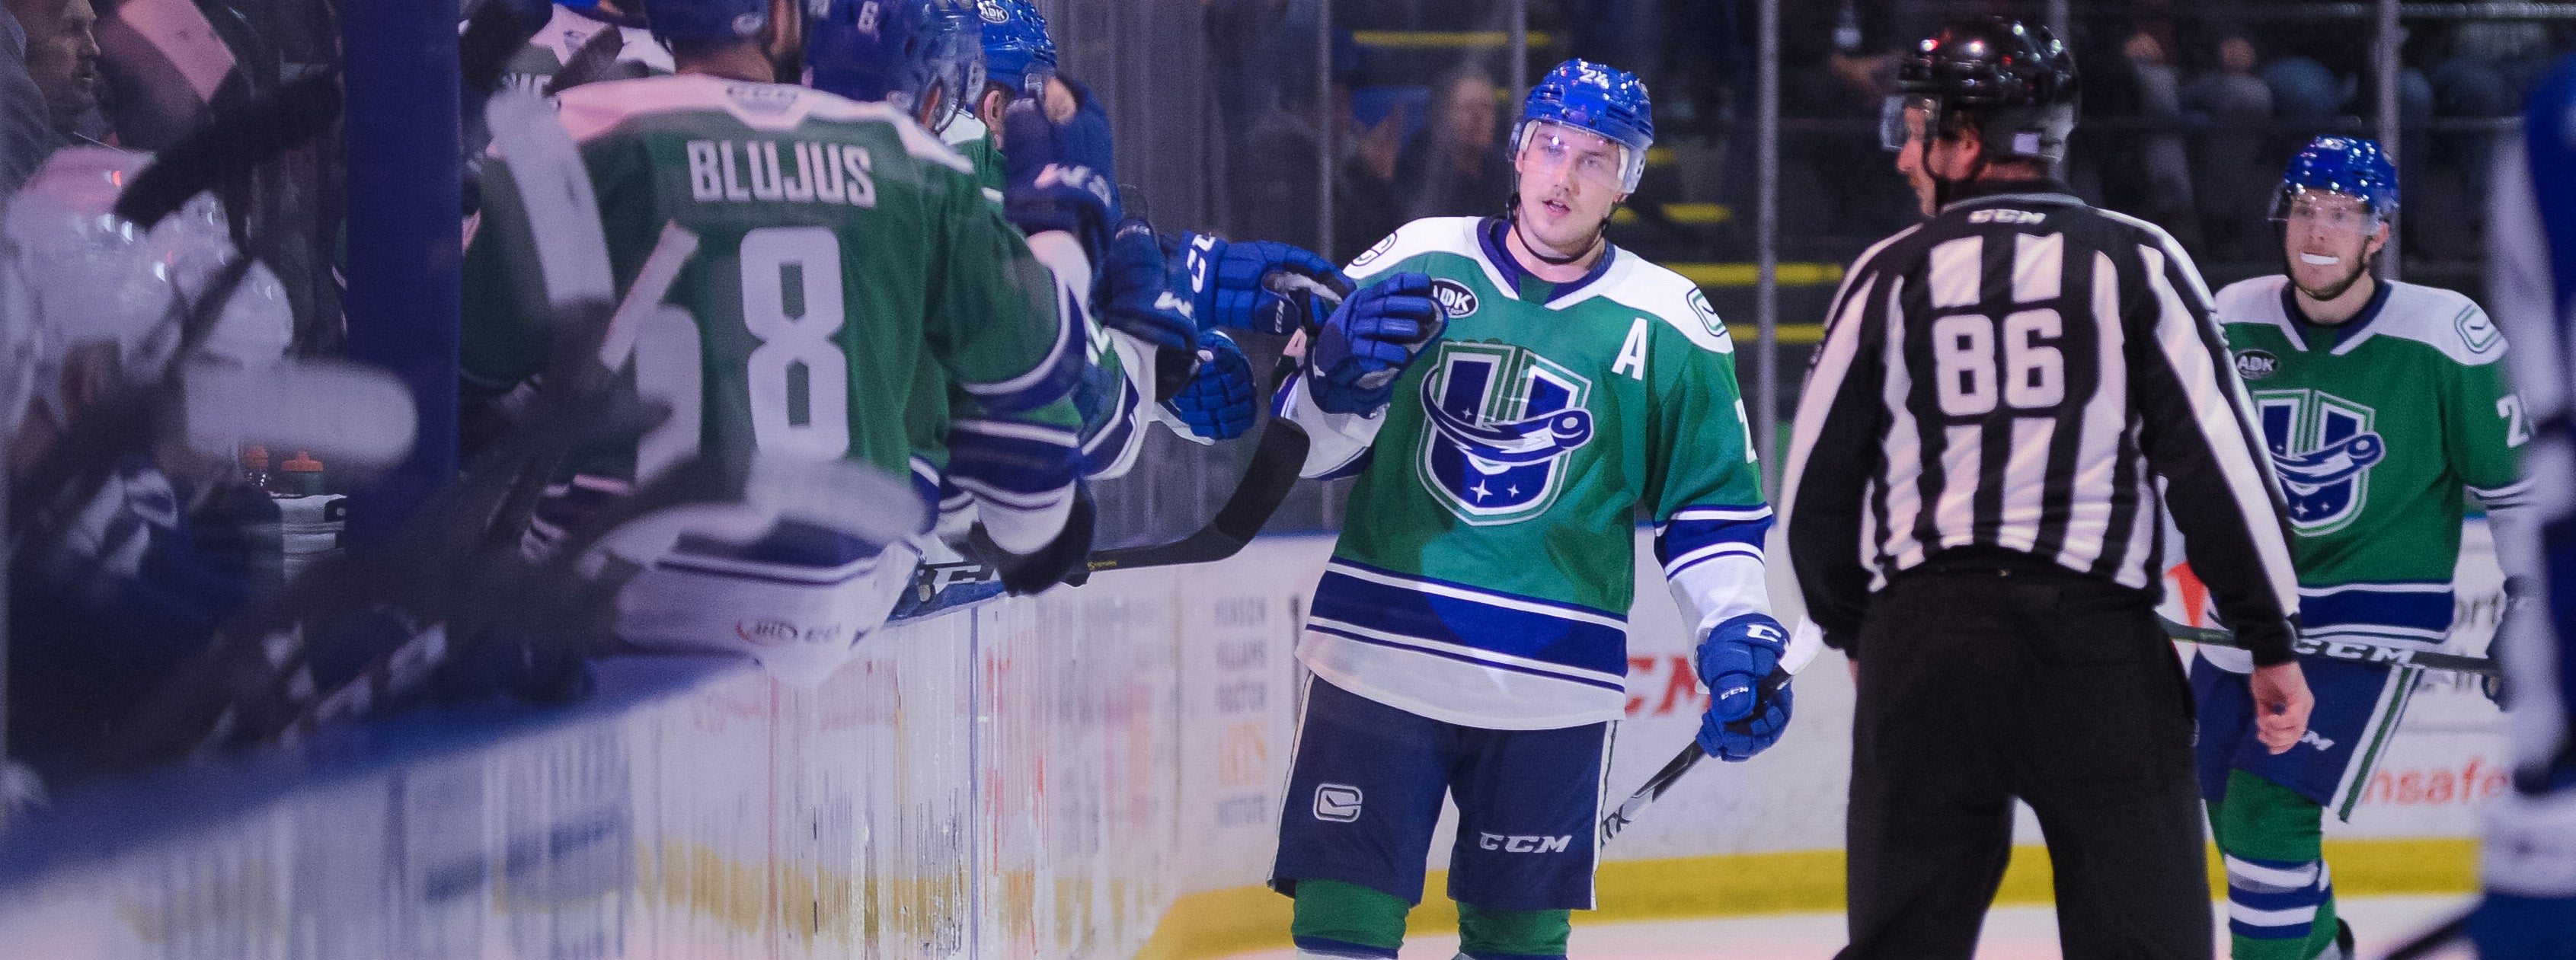 COMETS CRUISE TO 4-1 WIN OVER CRUNCH